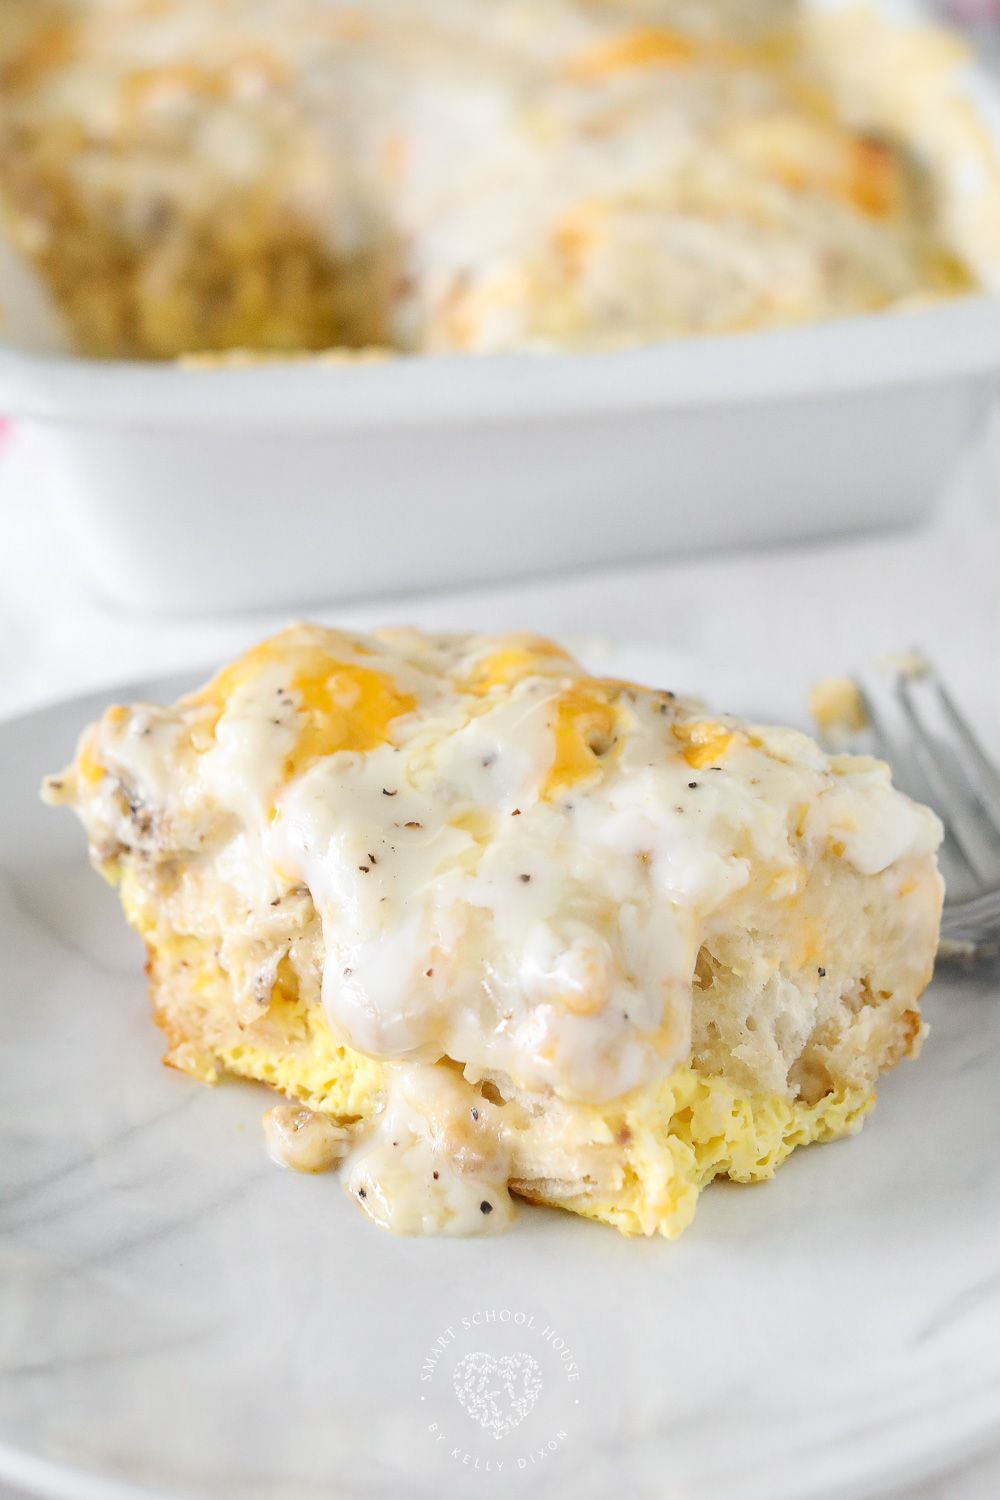 Biscuit and Gravy Casserole is a comforting breakfast recipe that hits the spot every time. A fun take on traditional biscuits and gravy!